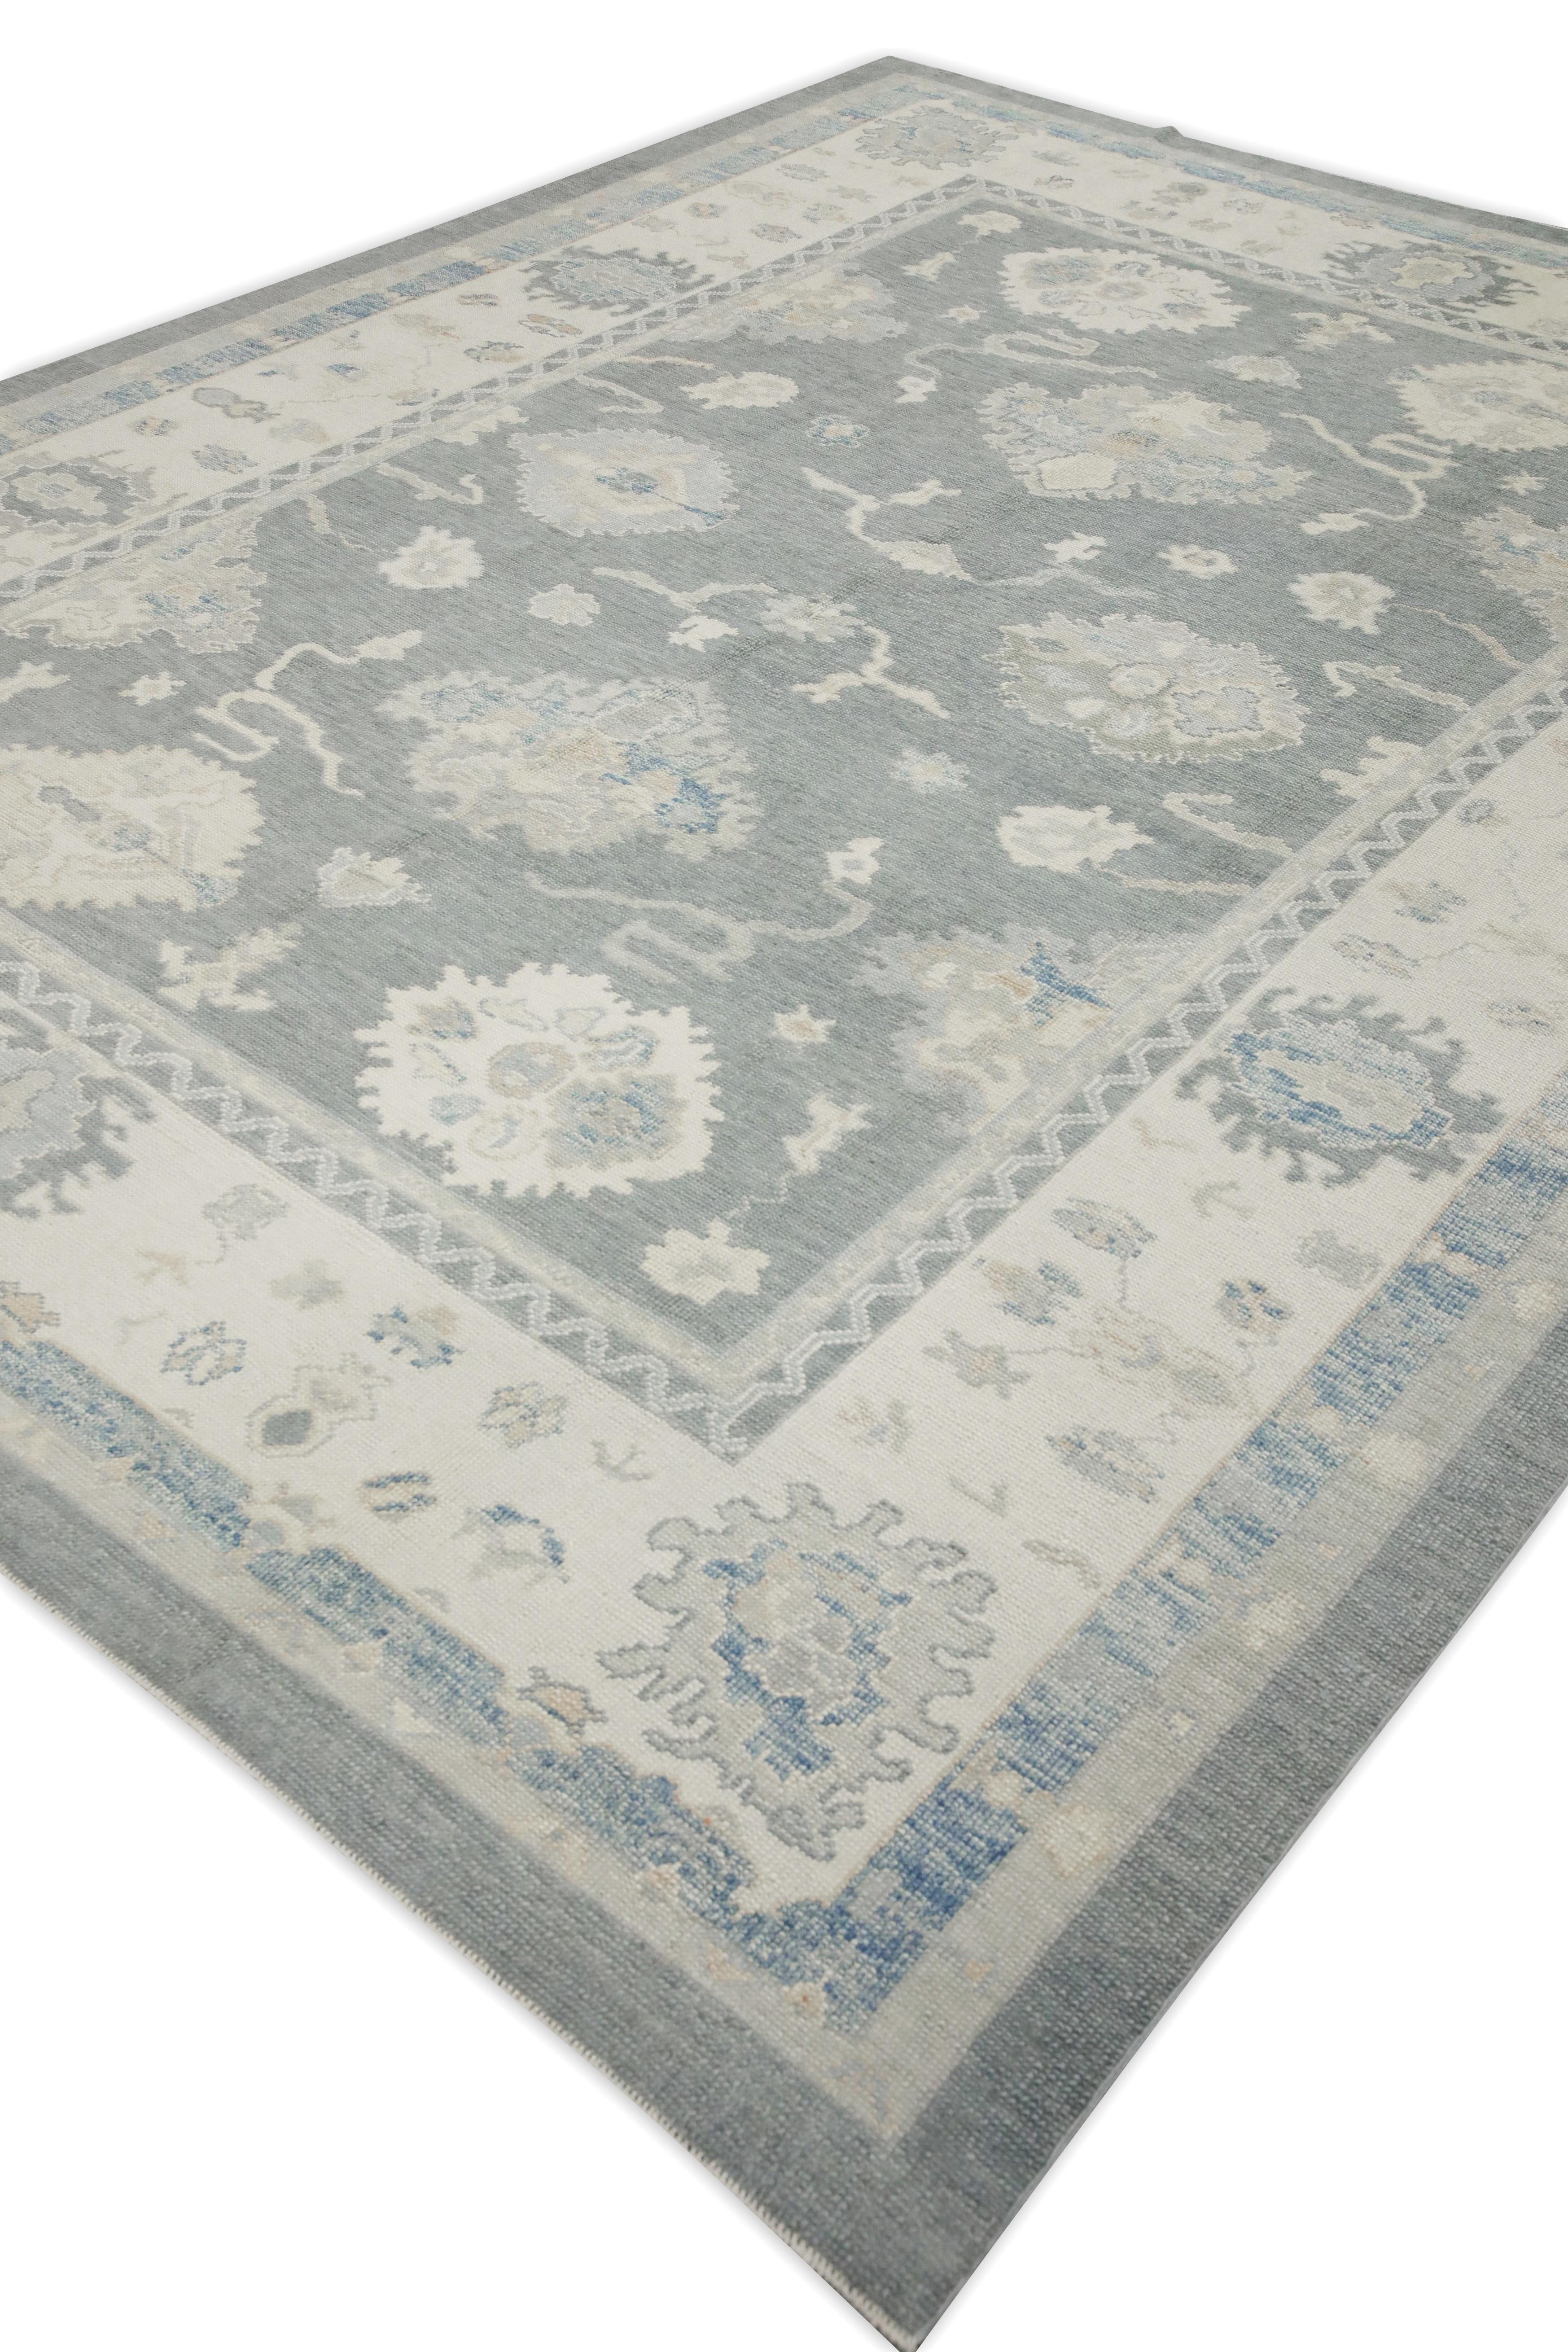 Contemporary Gray Floral Design Handwoven Wool Turkish Oushak Rug 9'1